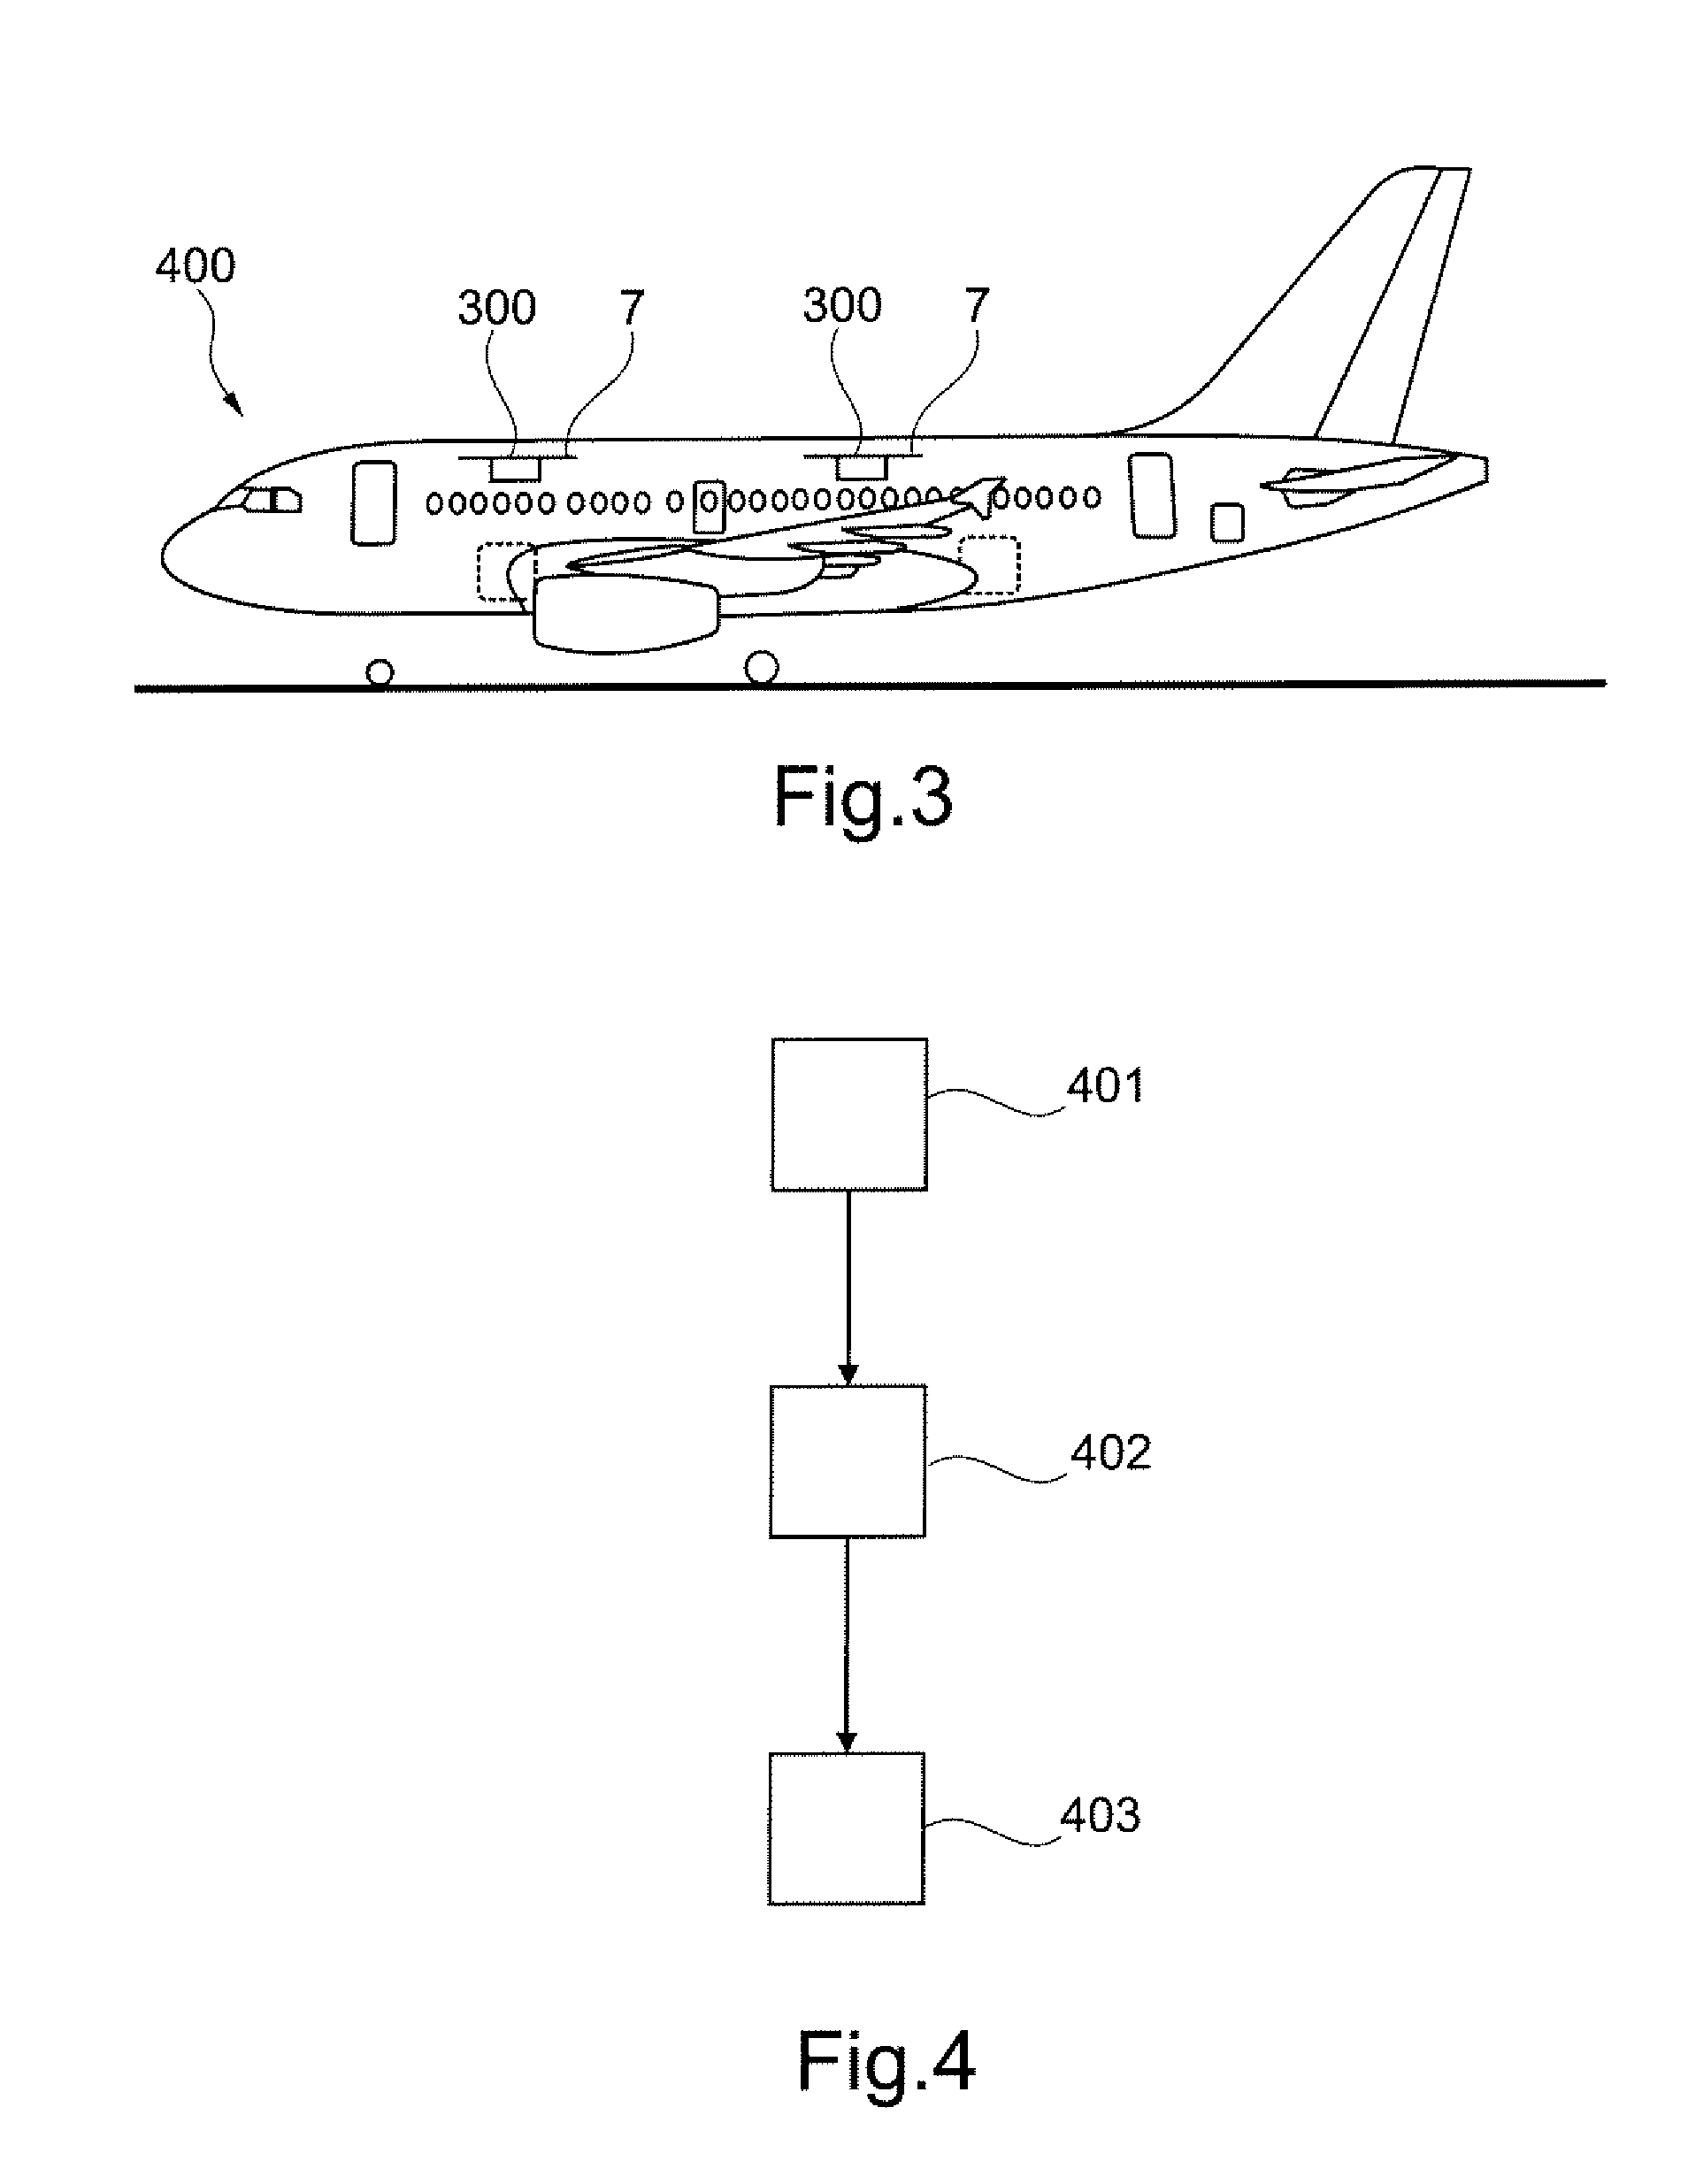 In-cabin room projection for aircraft